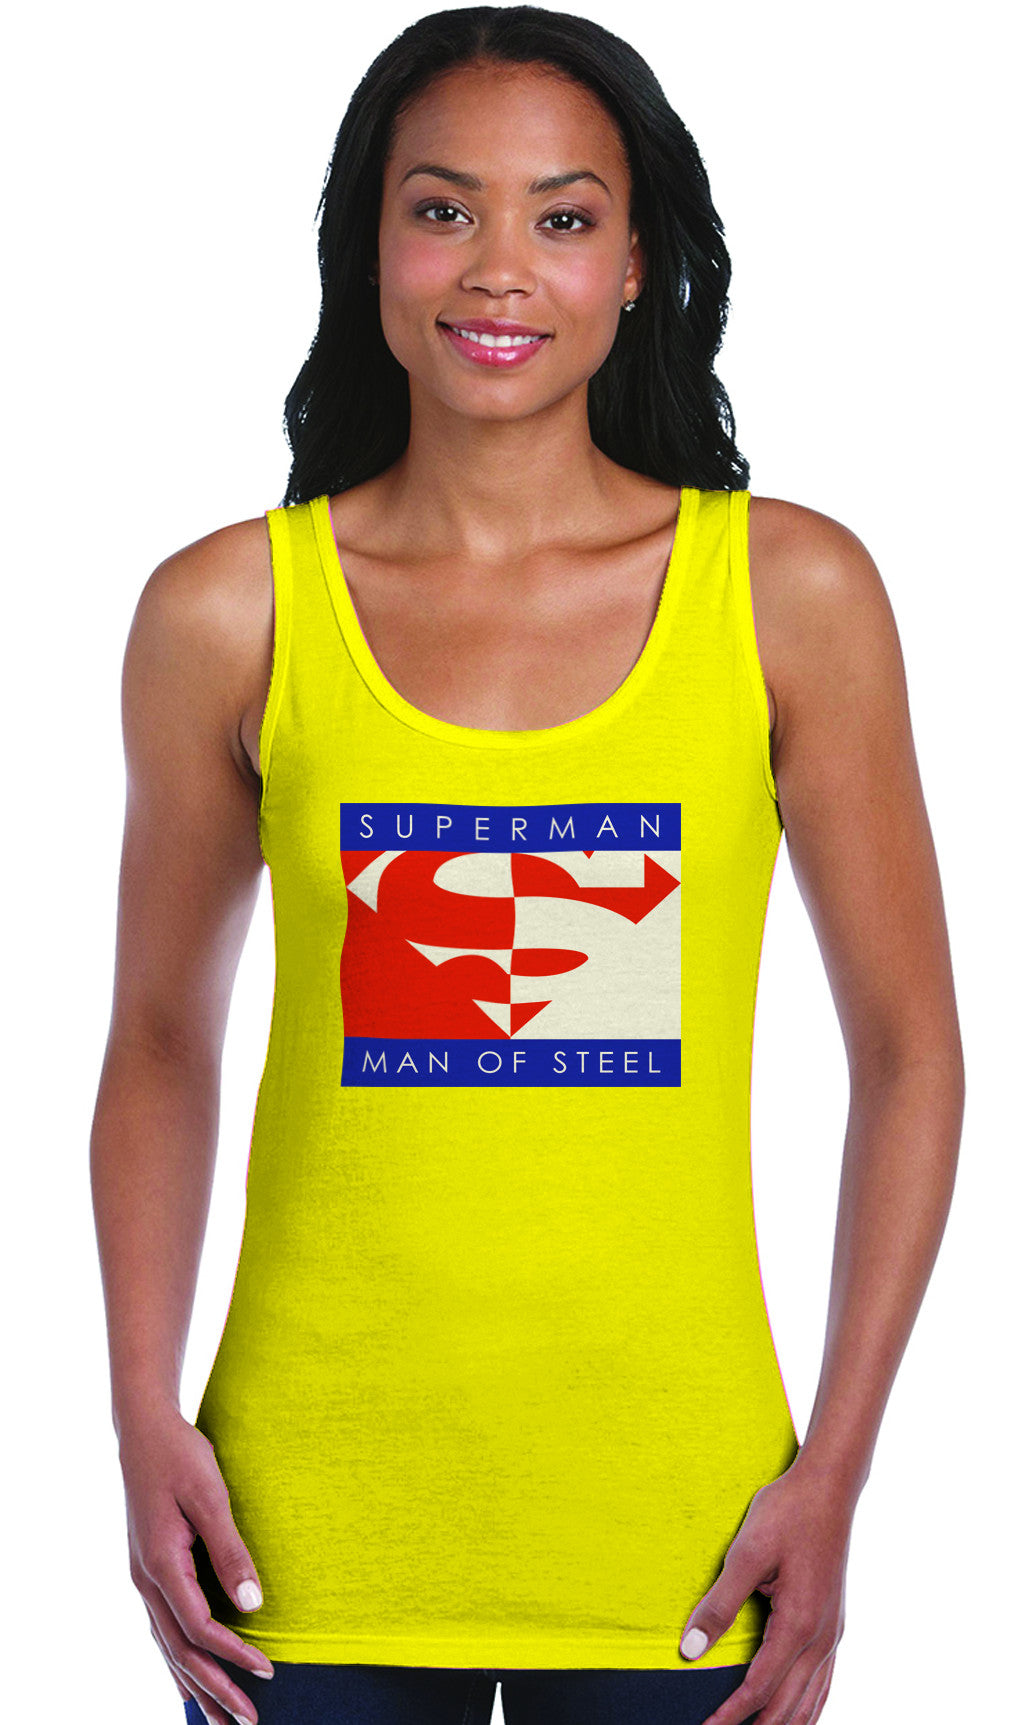 Superman Block Logo on Yellow Fitted Sheer Tank Top for Women - TshirtNow.net - 1